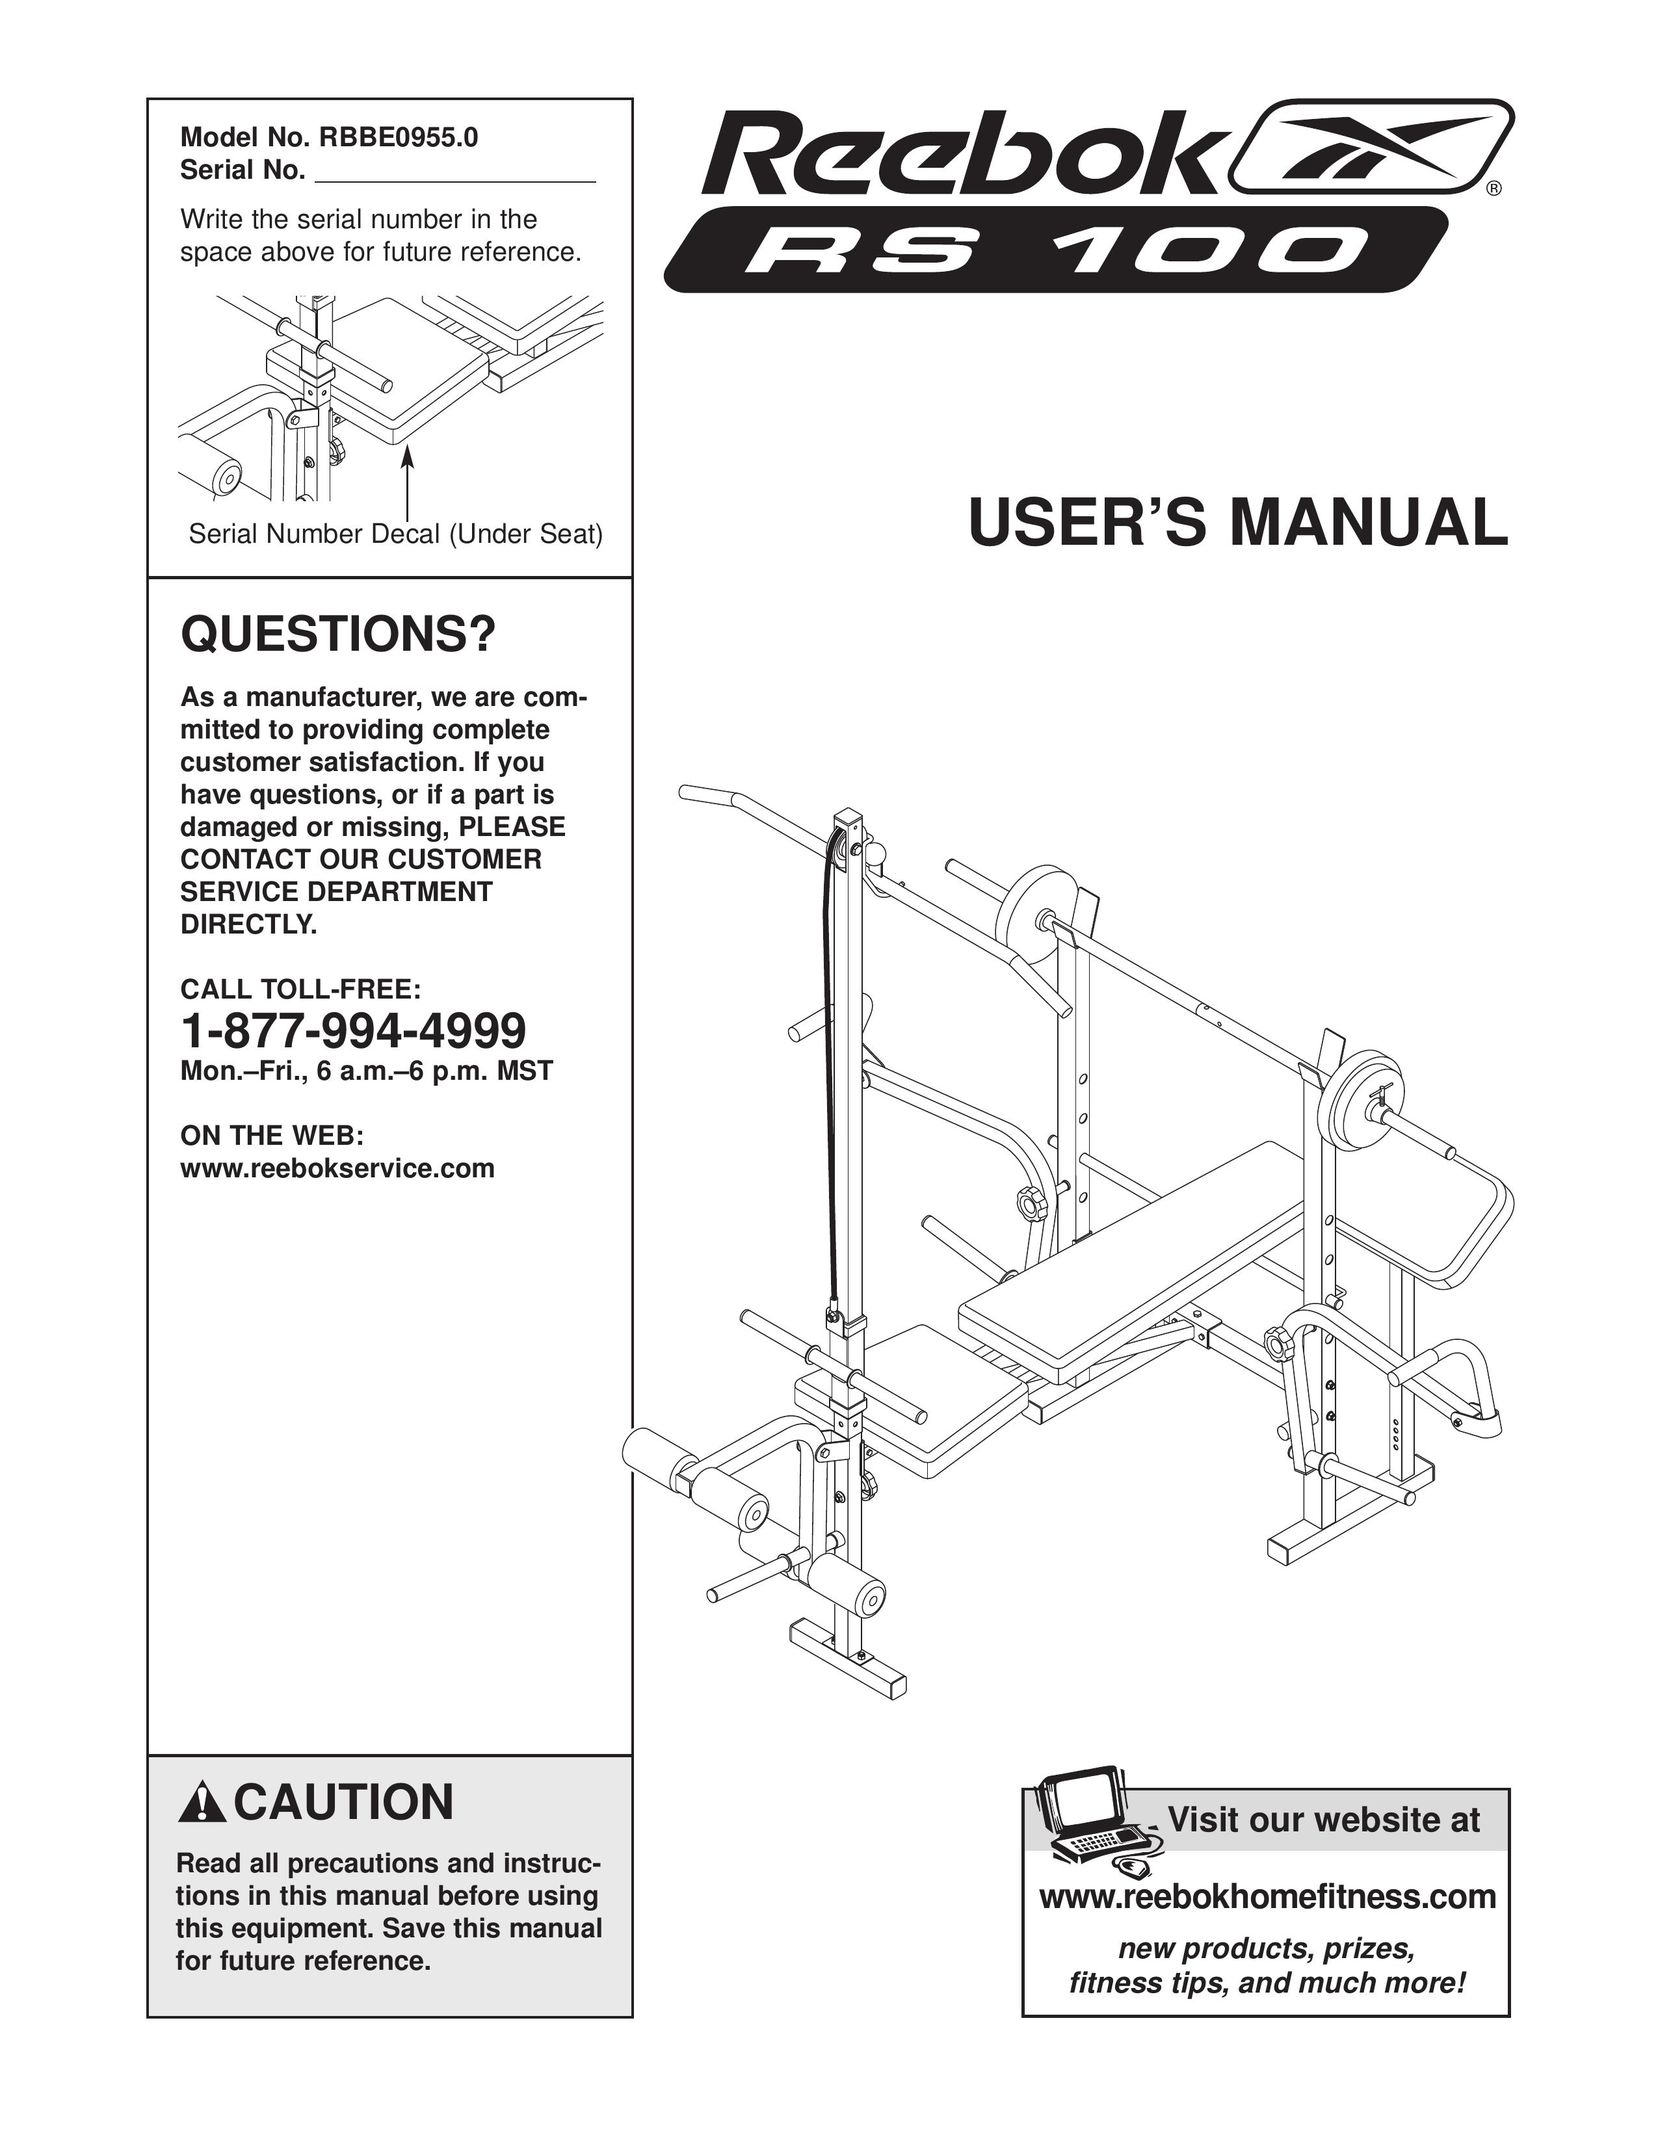 Reebok Fitness RBBE0955.0 Home Gym User Manual